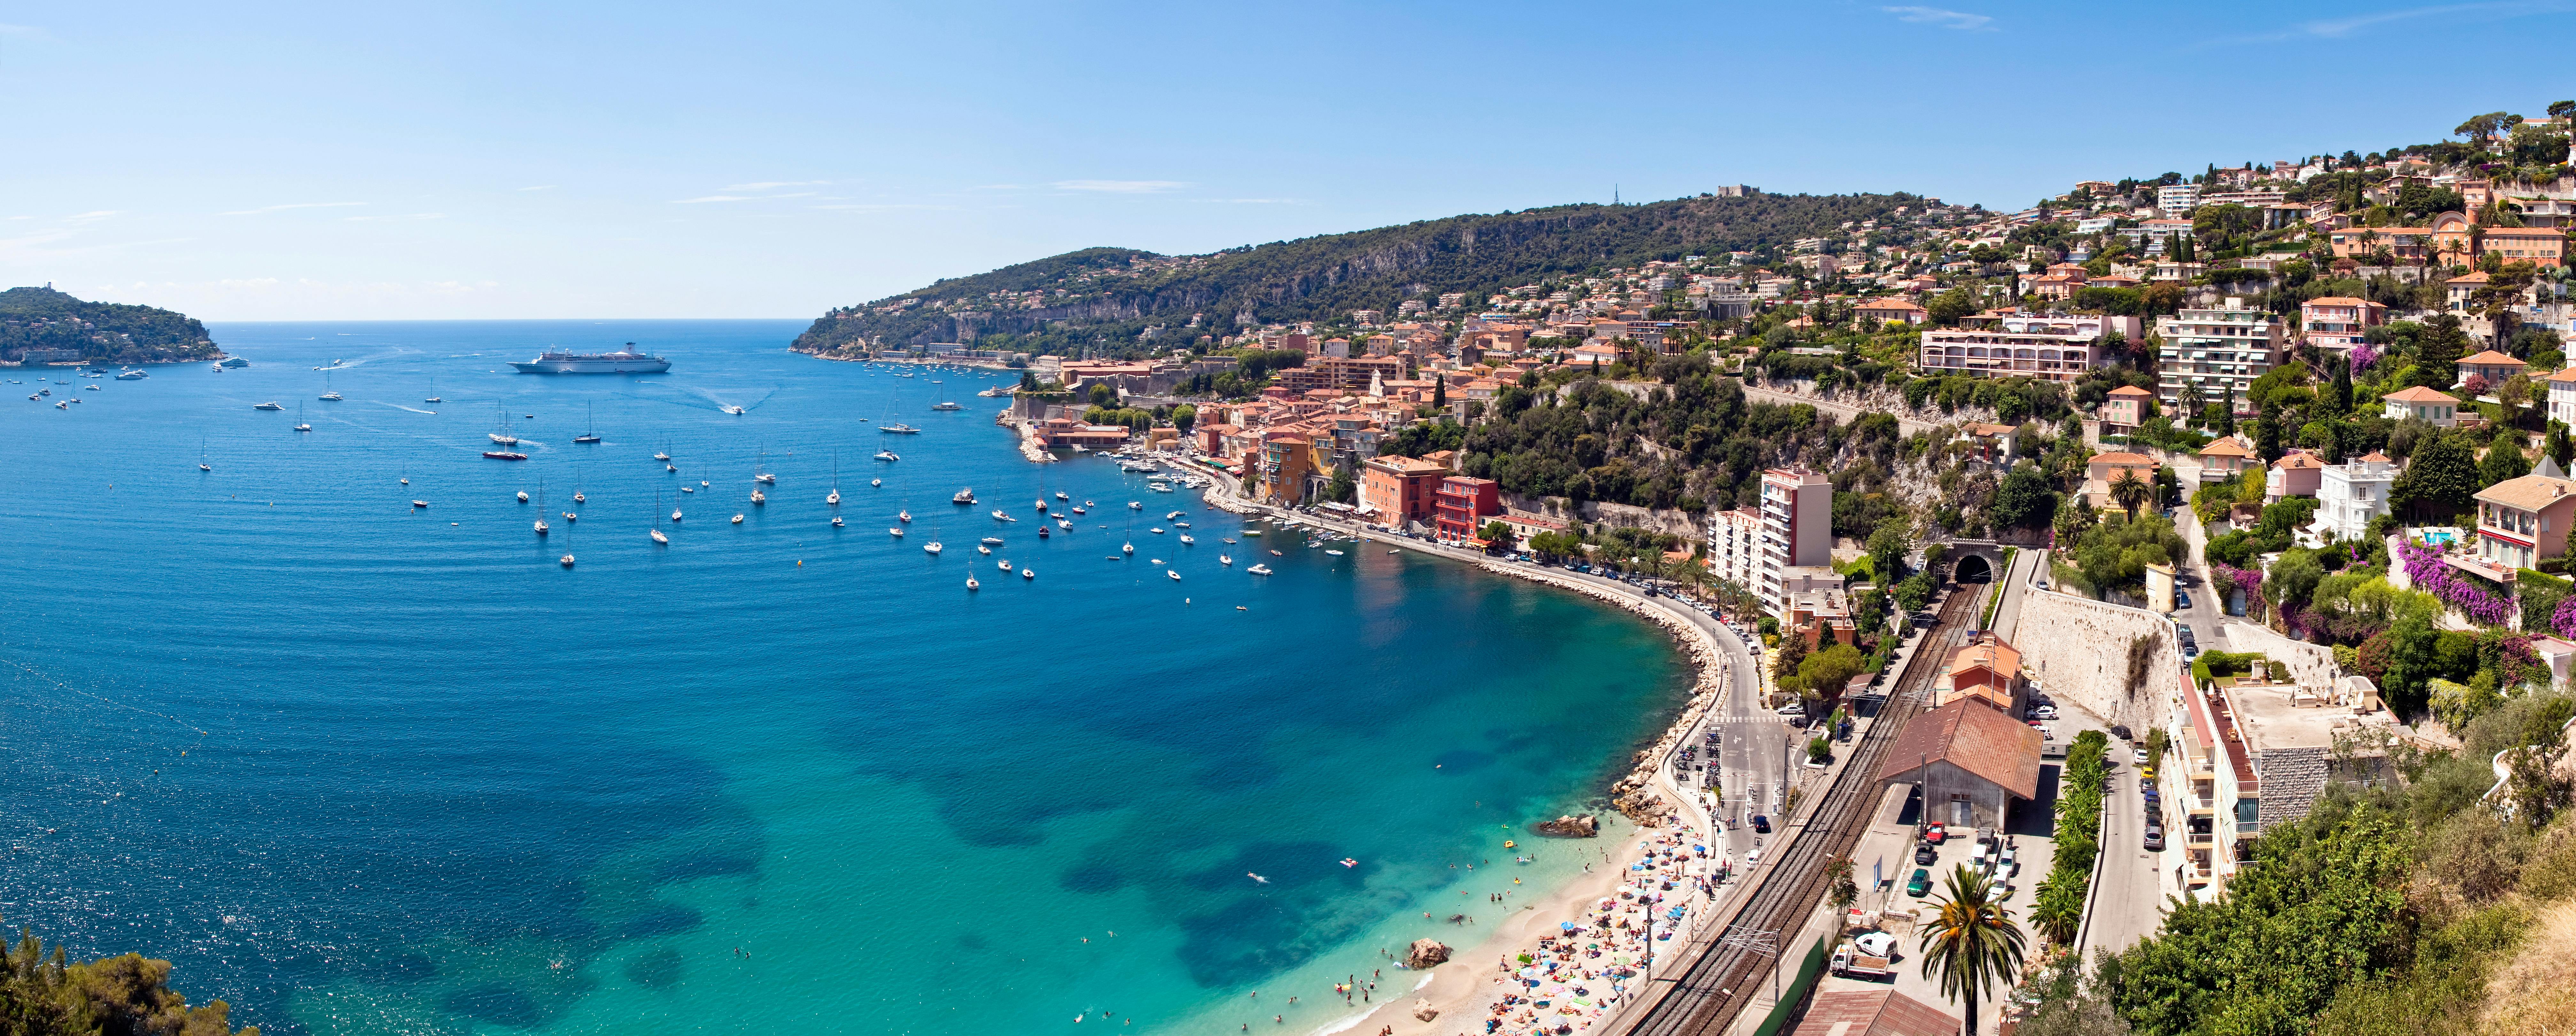 Private Cannes and Antibes trip from Nice or Villefranche ports Musement